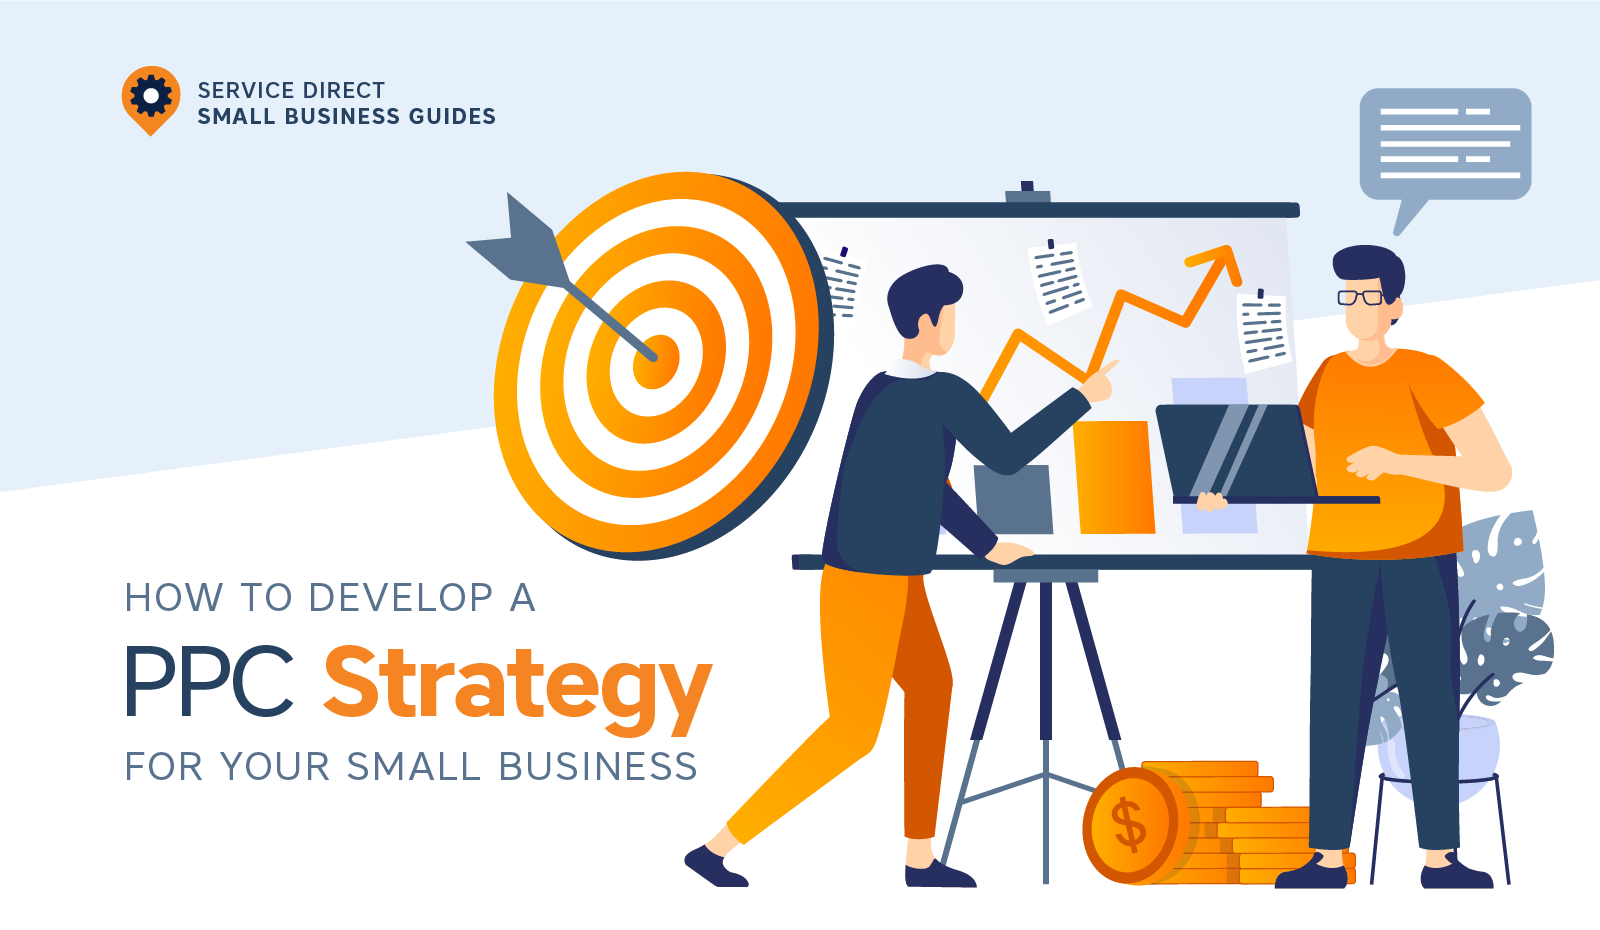 Developing PPC Strategy for Your Small Business